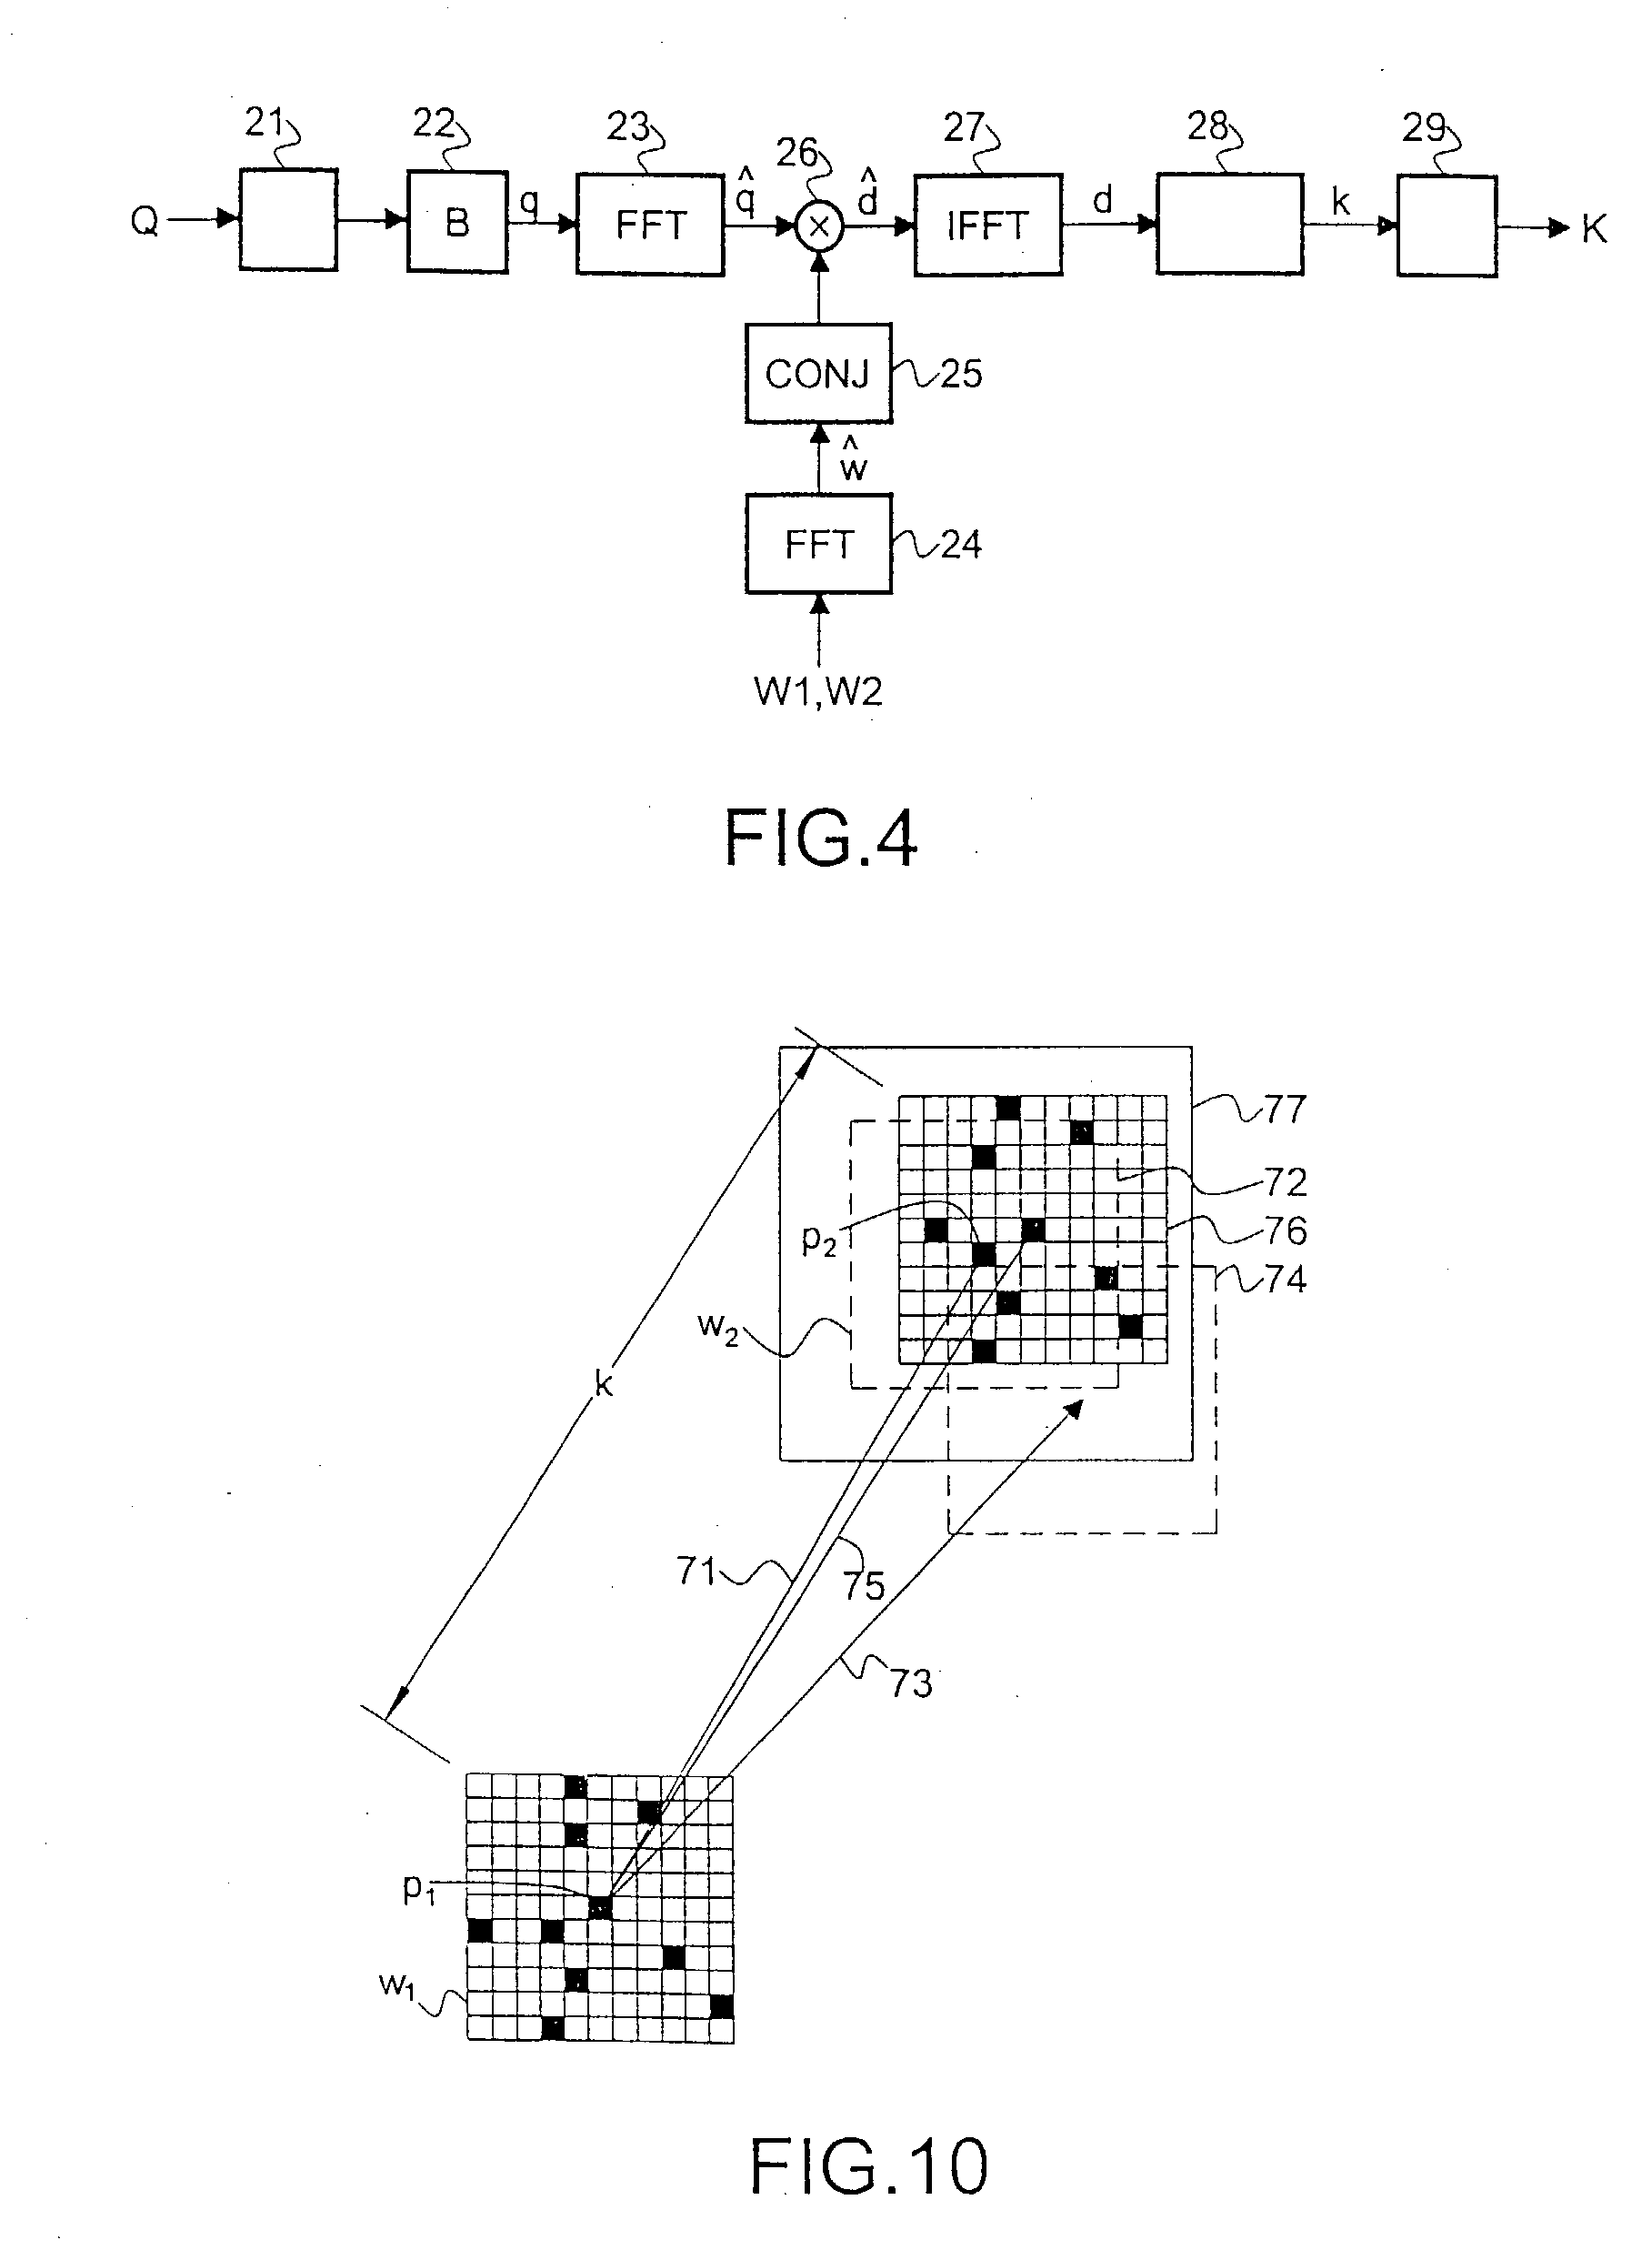 Detection of auxiliary data in an information signal